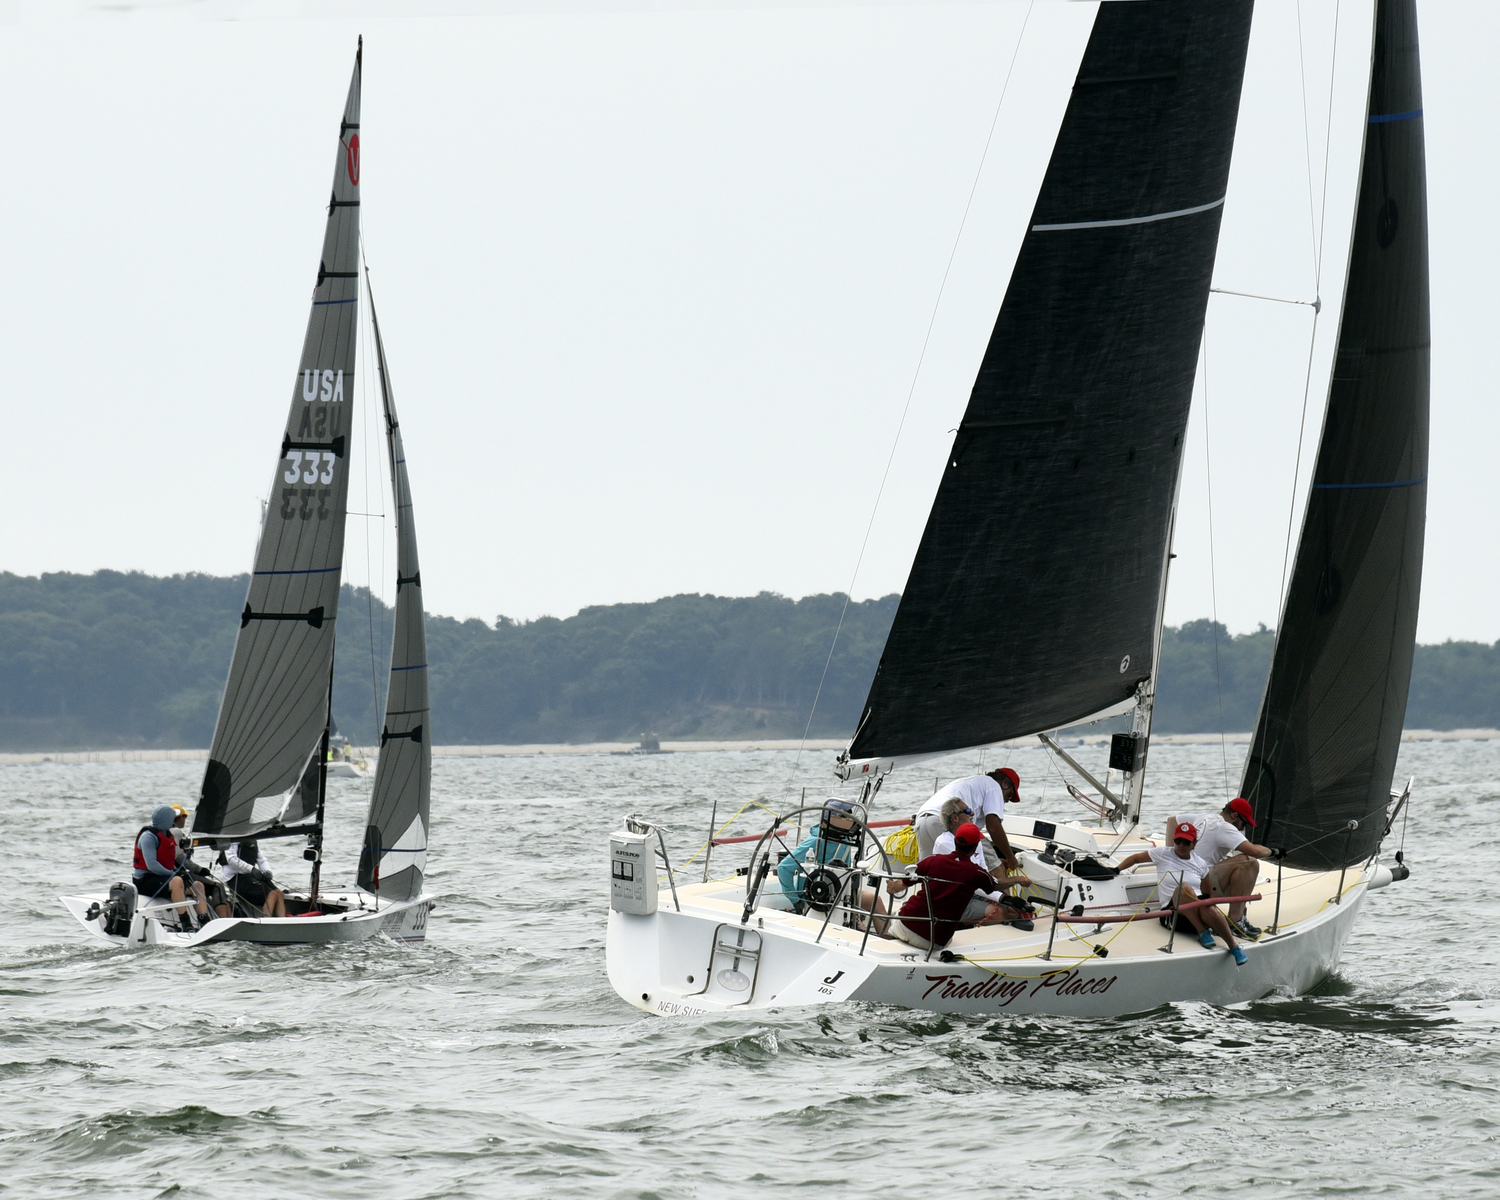 Viper Glory Days, left, about to pass Trading Places, a dual between two different spinnaker divisions.   MICHAEL MELLA